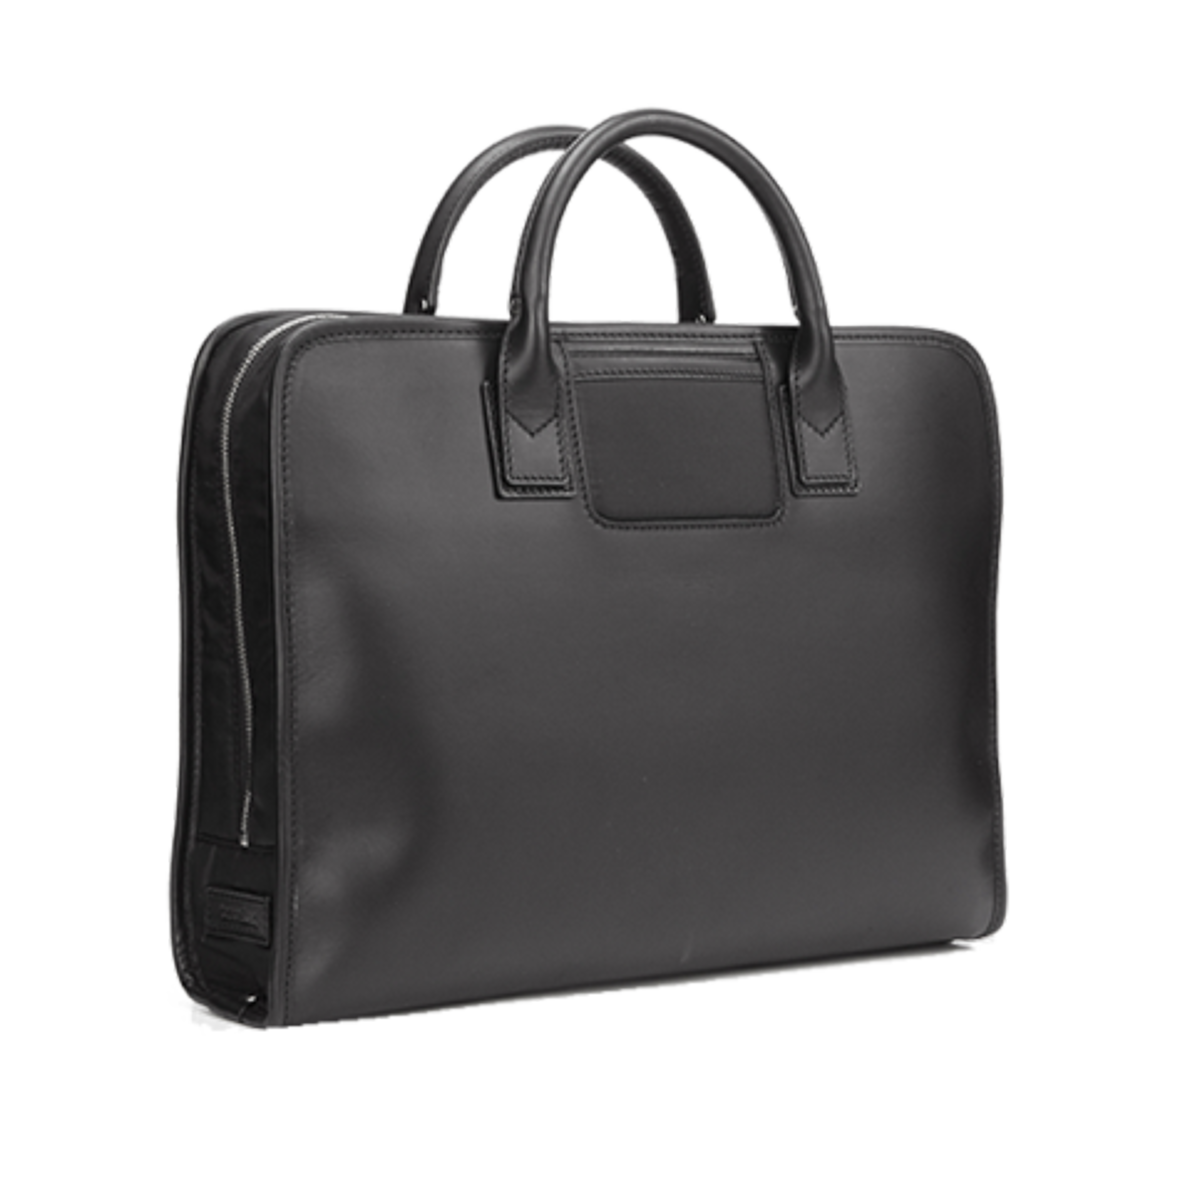 Travelteq - The Black Leather, Bags | NEW TAILOR Webshop